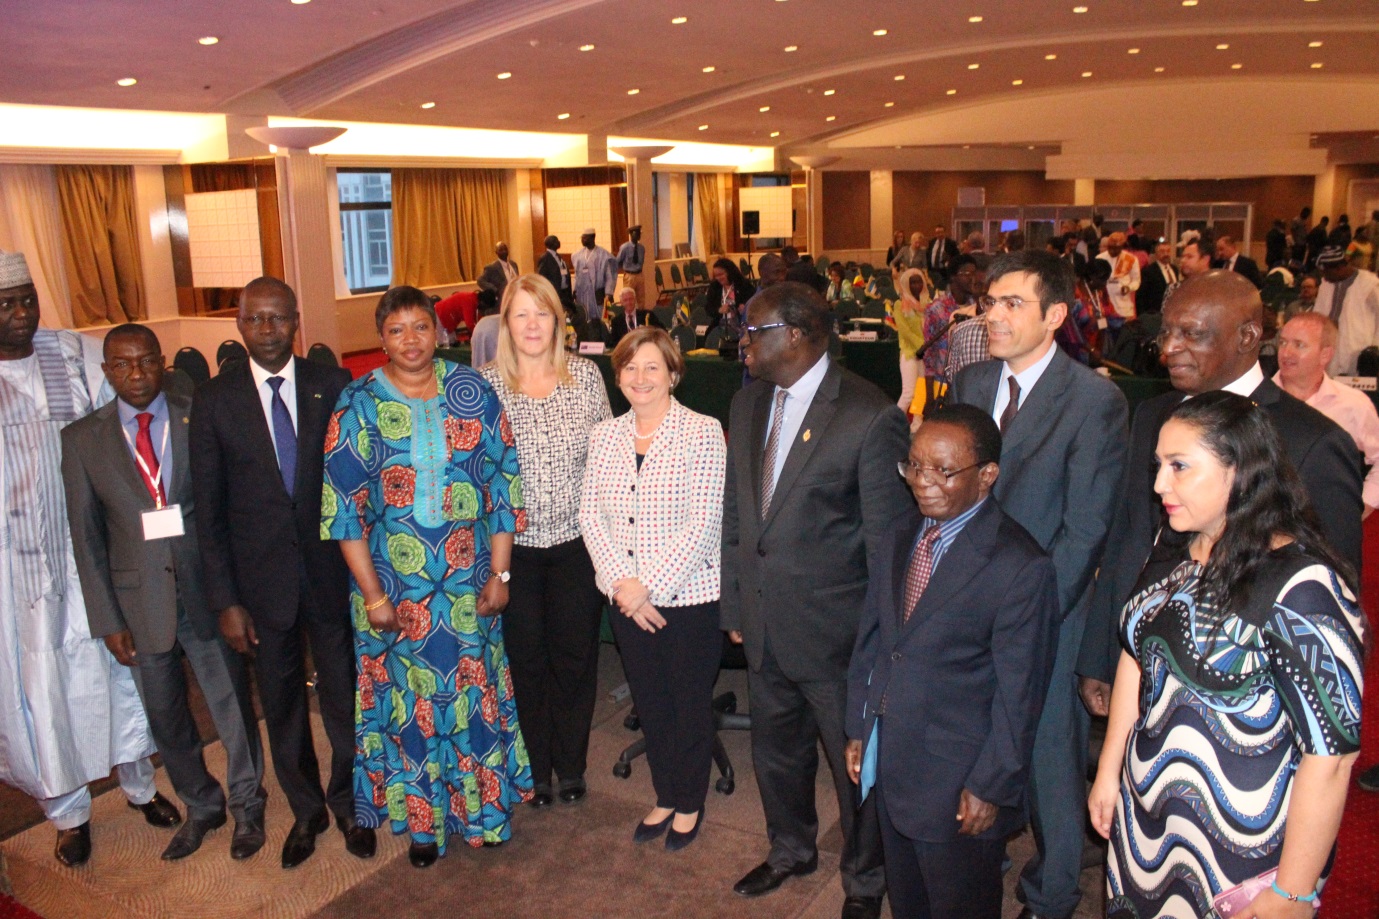 H.E. Ousseini Tinni, President of  the National Assembly of Niger; H.E. Mamadou Lamine Thiam, Member of the National Assembly of the Republic of Senegal and President of the Organising Committee;  H.E. Mohammed Dionne, Prime Minister of Senegal; Ms Fatou Bensouda, ICC Prosecutor; Ms Margarita Stolbizer, President of Parliamentarians for Global Action; Judge Silvia Fernández de Gurmendi, ICC Presi